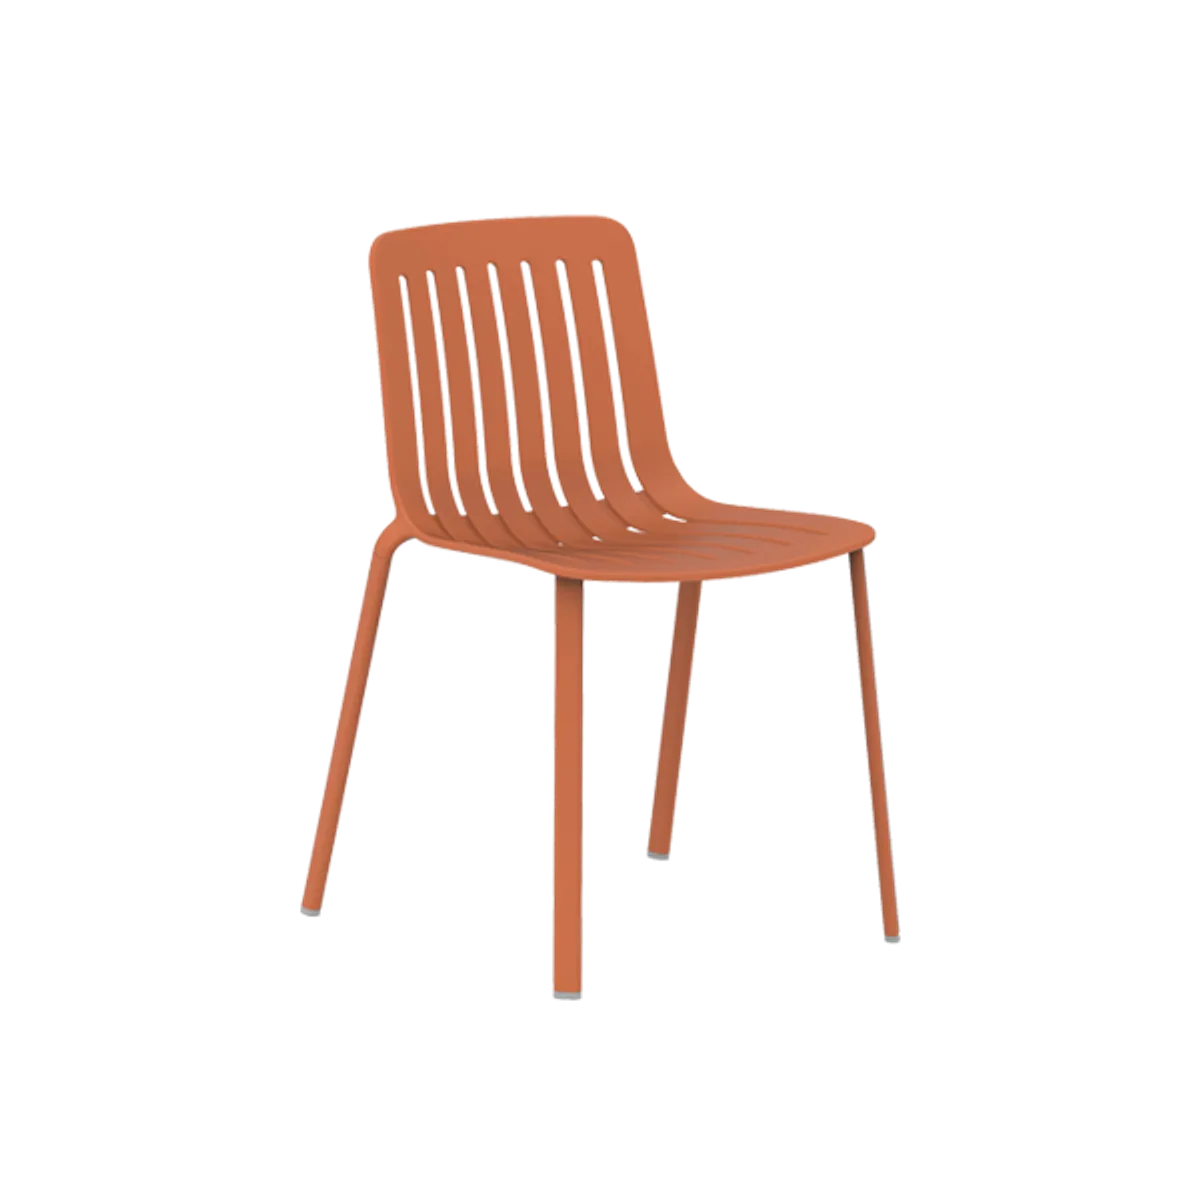 Plato side chair Inside Out Contracts